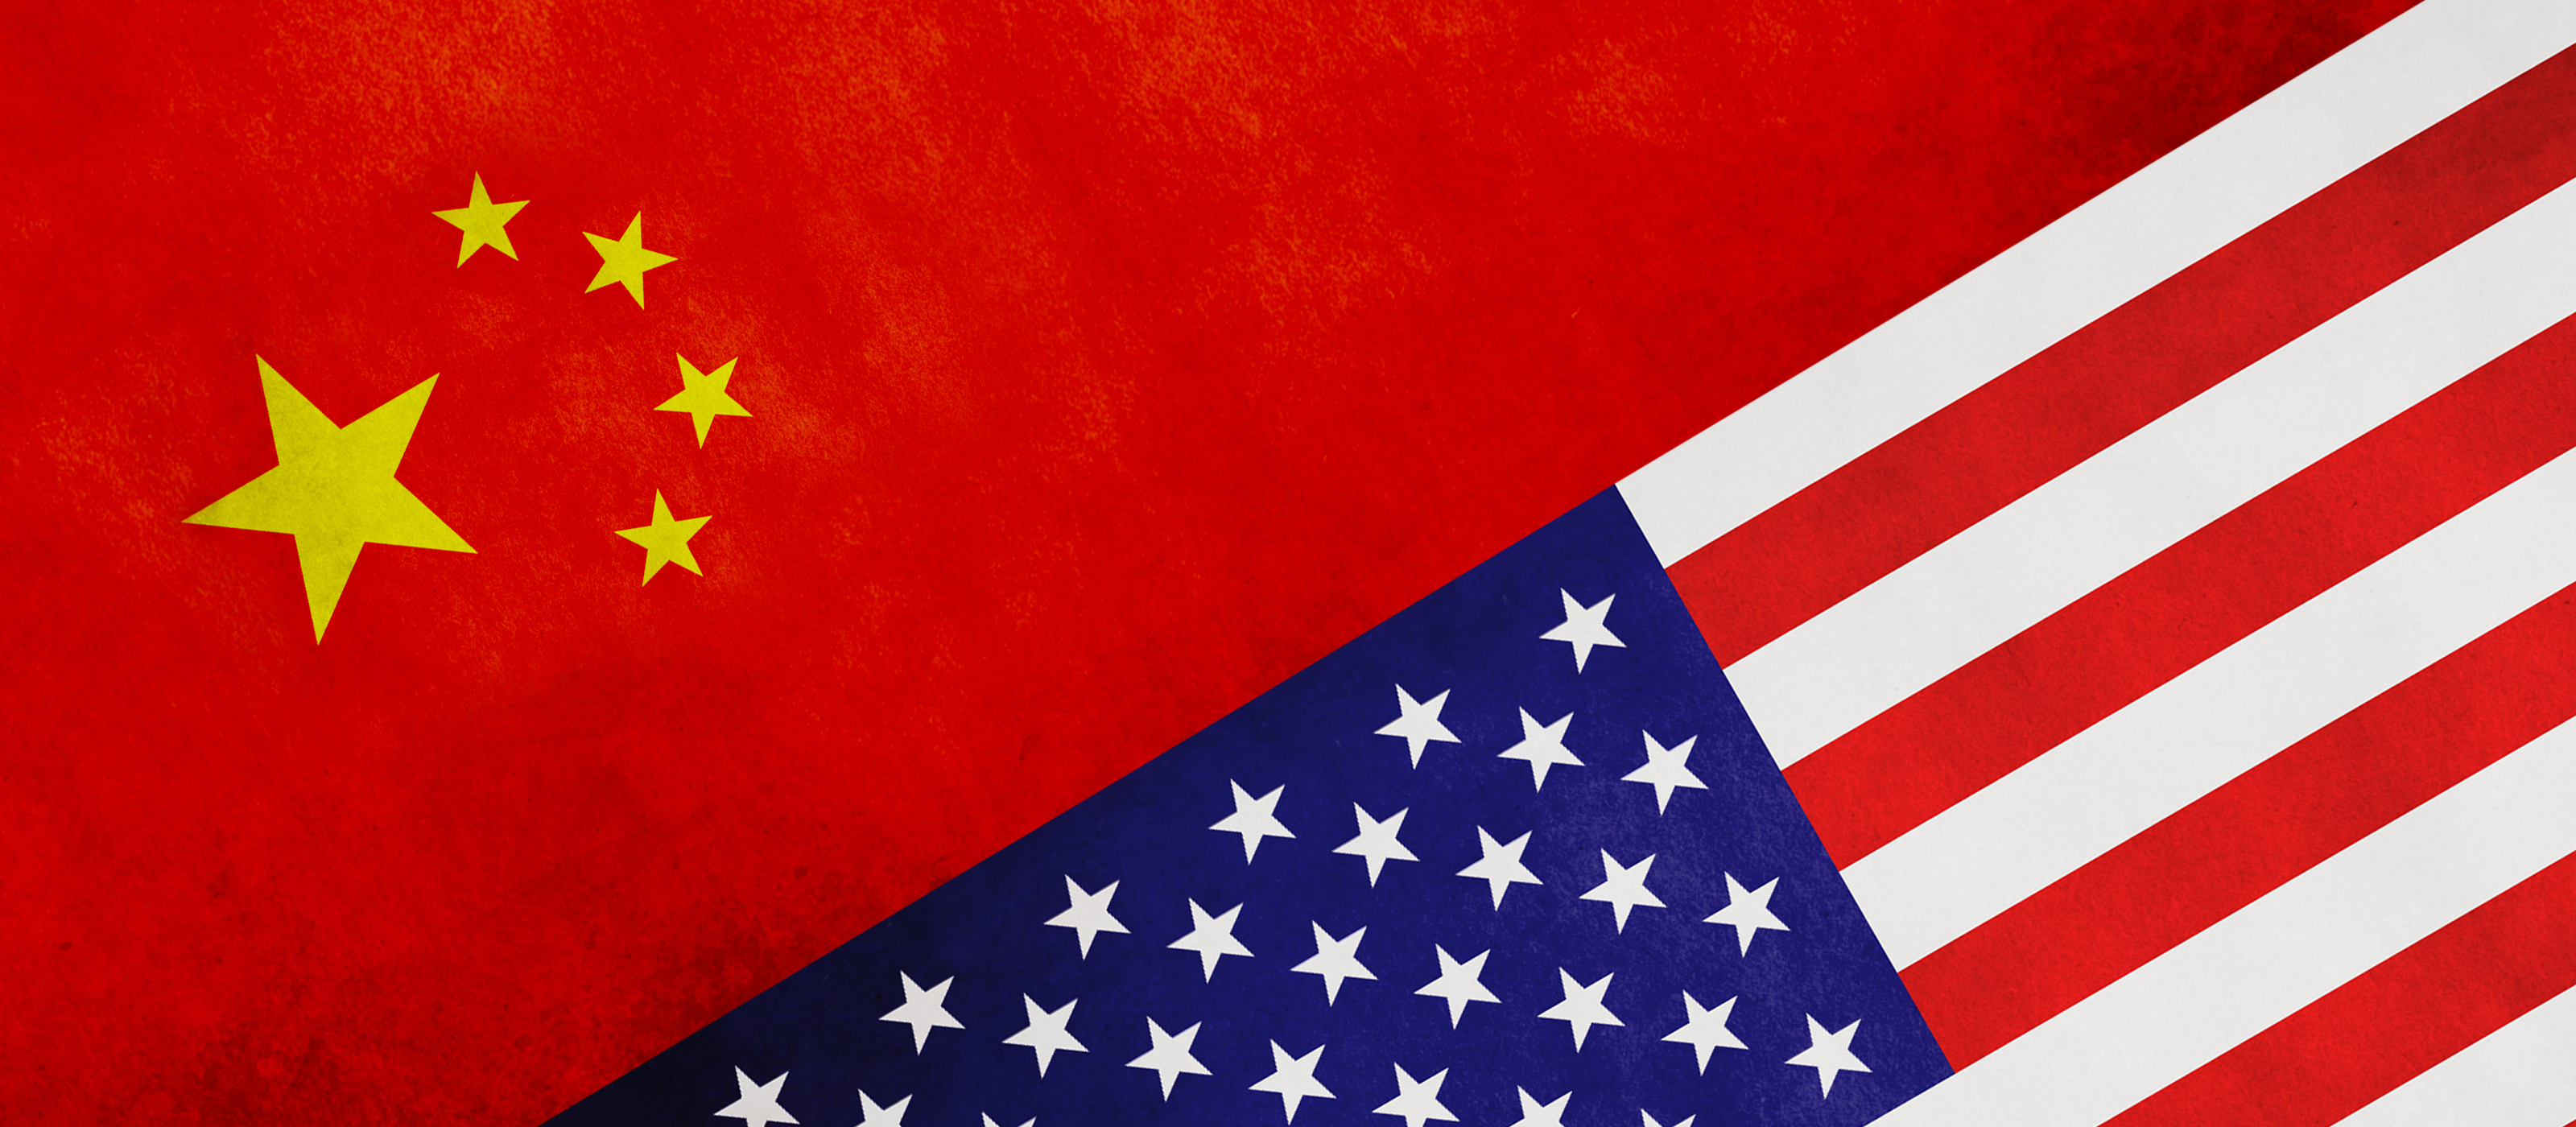 The Heat: US levies tariffs against China